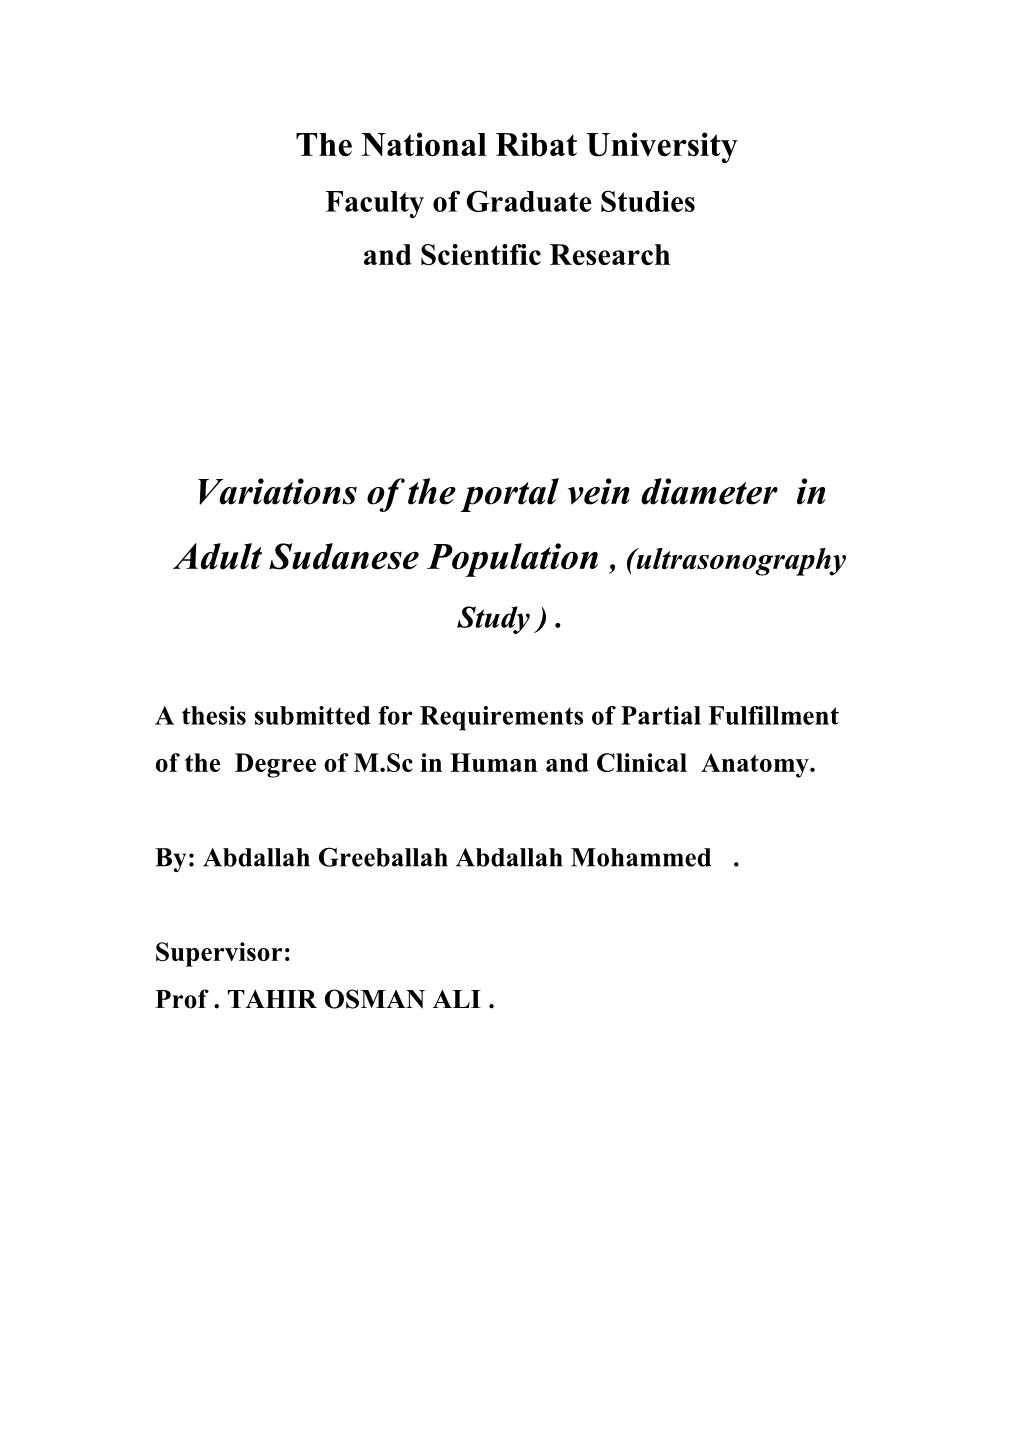 Variations of the Portal Vein Diameter in Adult Sudanese Population , (Ultrasonography Study )